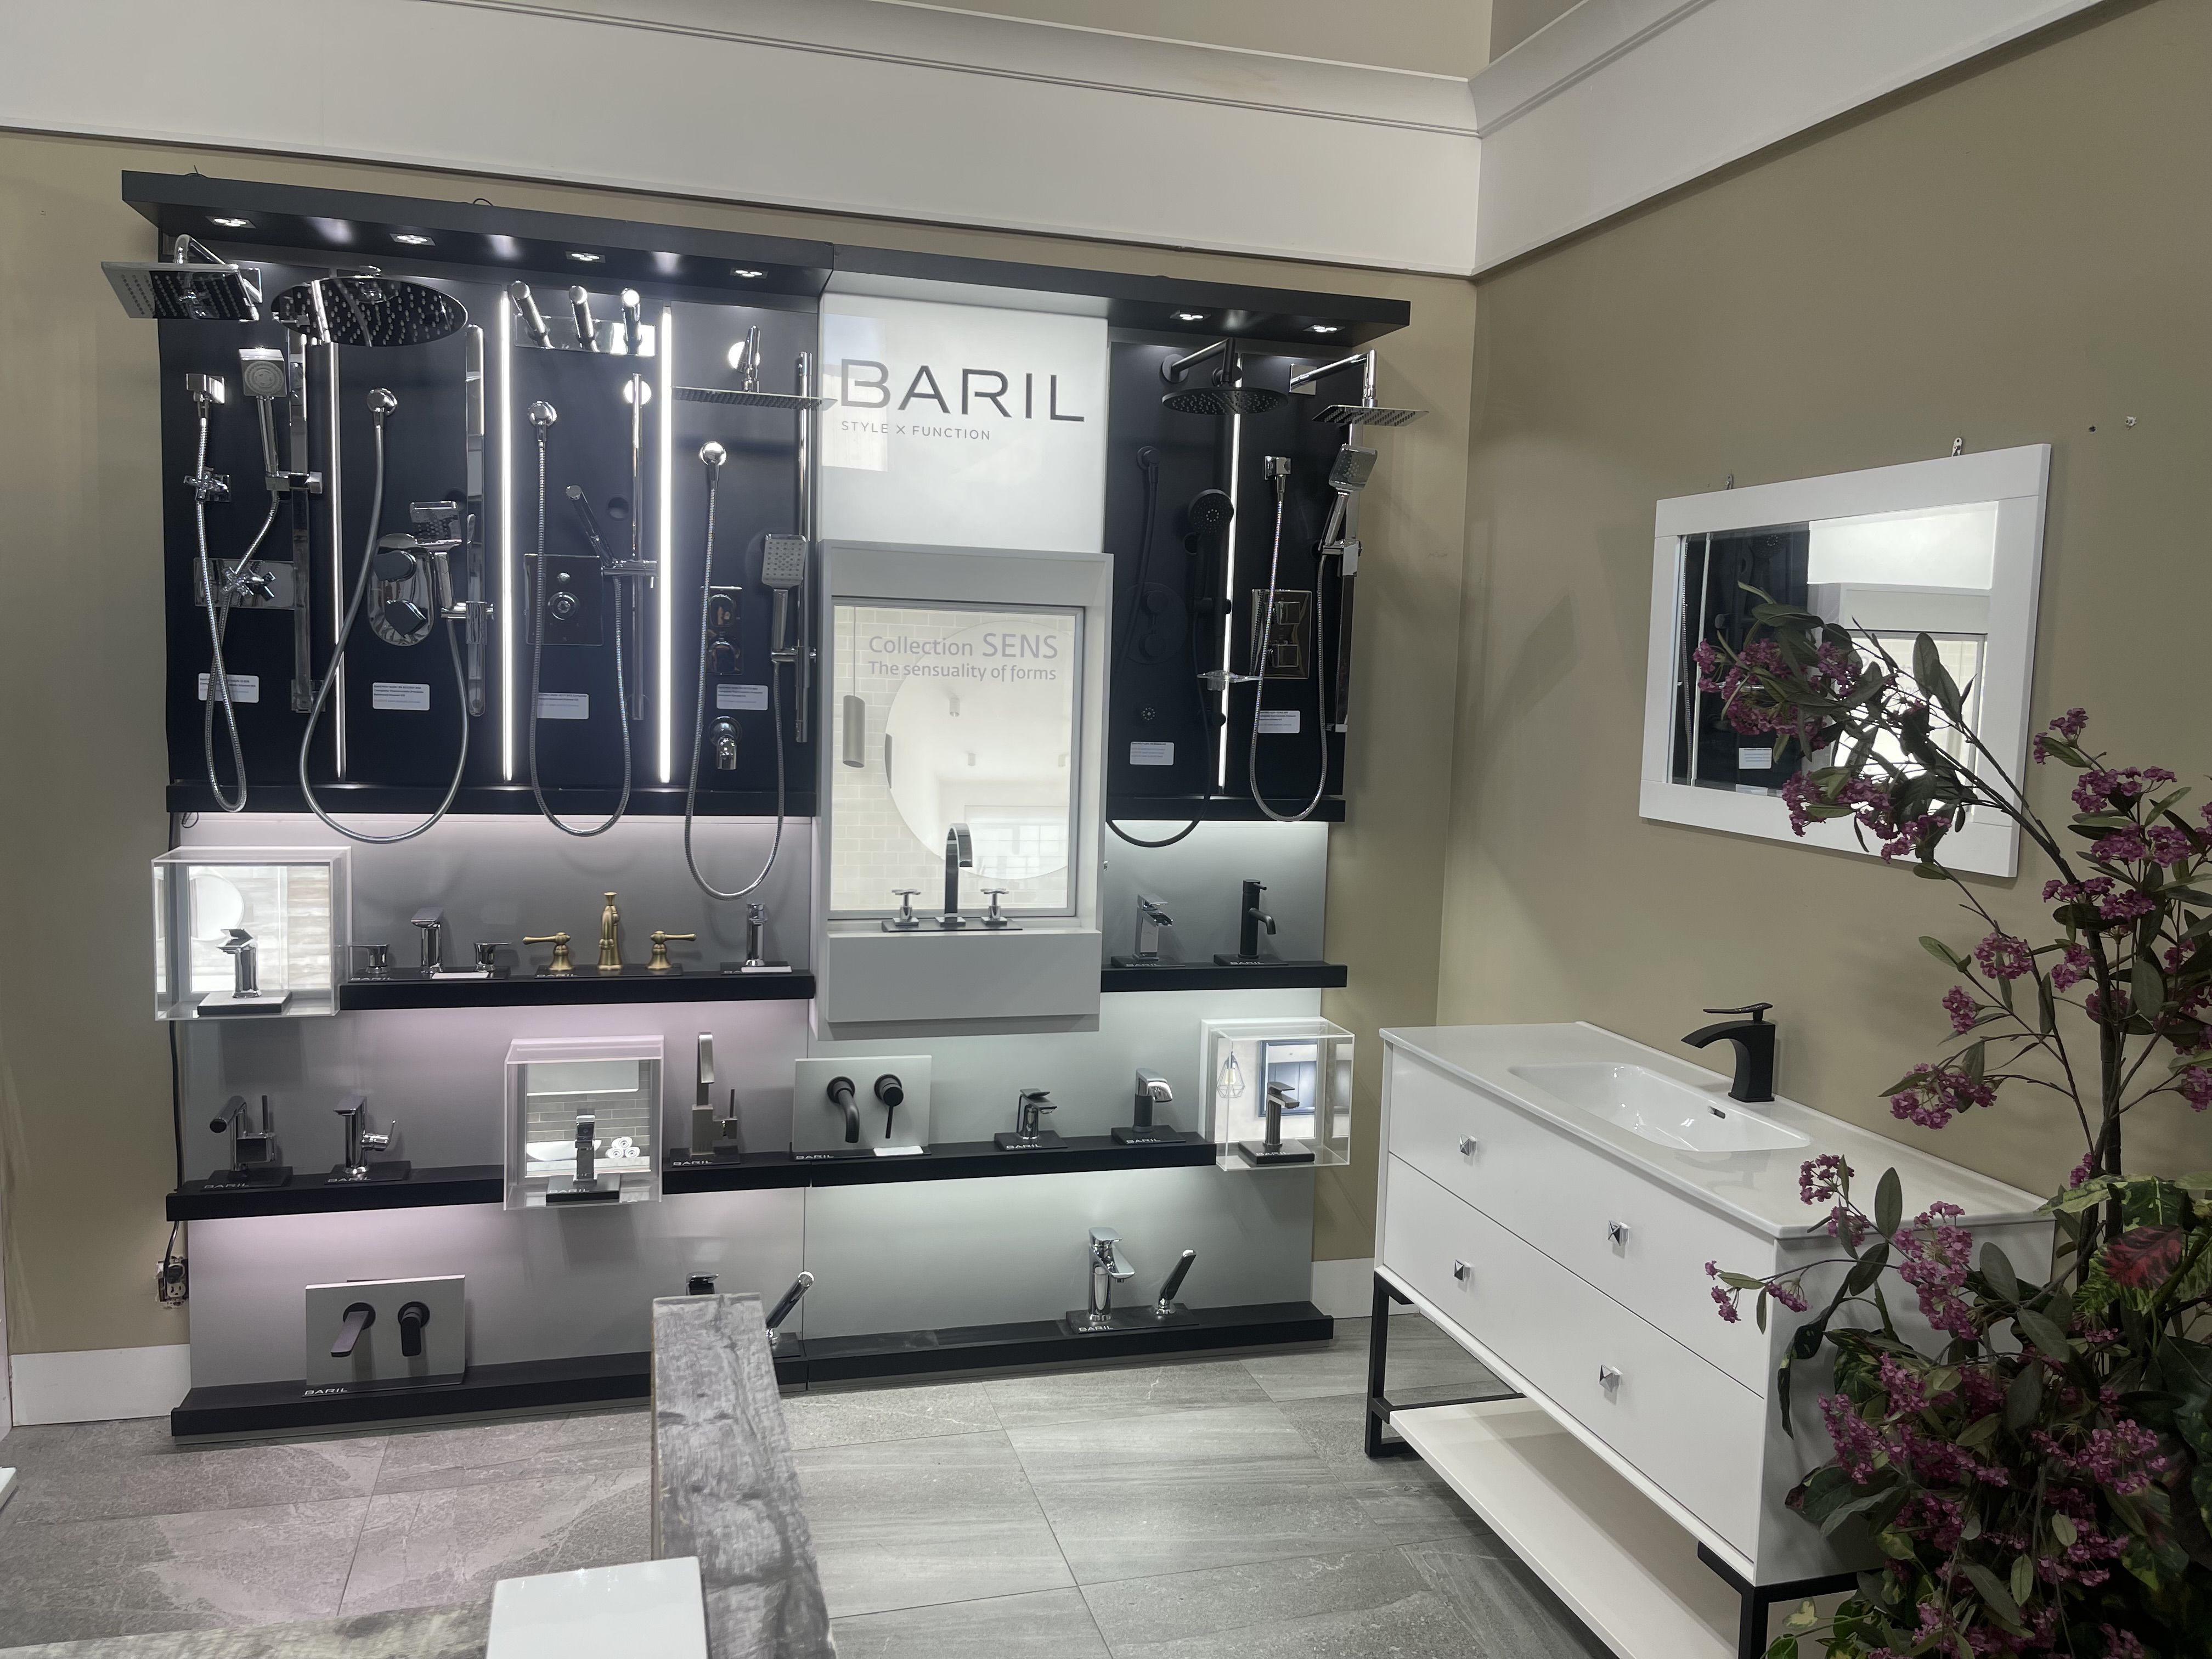 Rohl faucet display